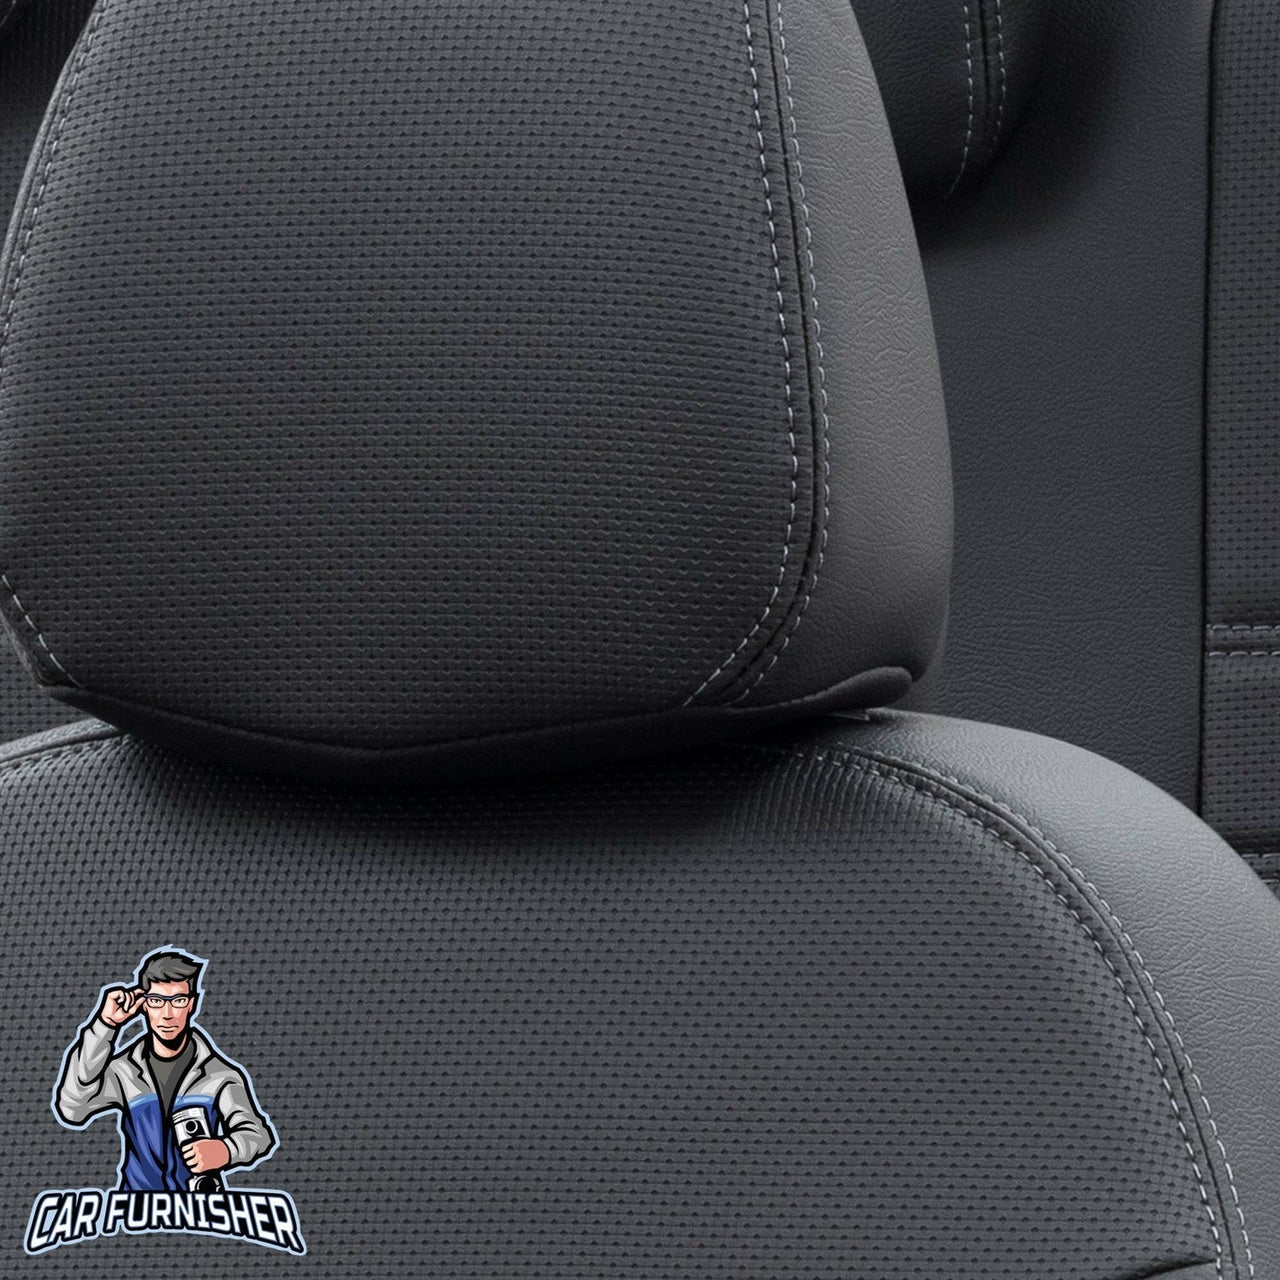 Dacia Spring Seat Covers New York Leather Design Black Leather